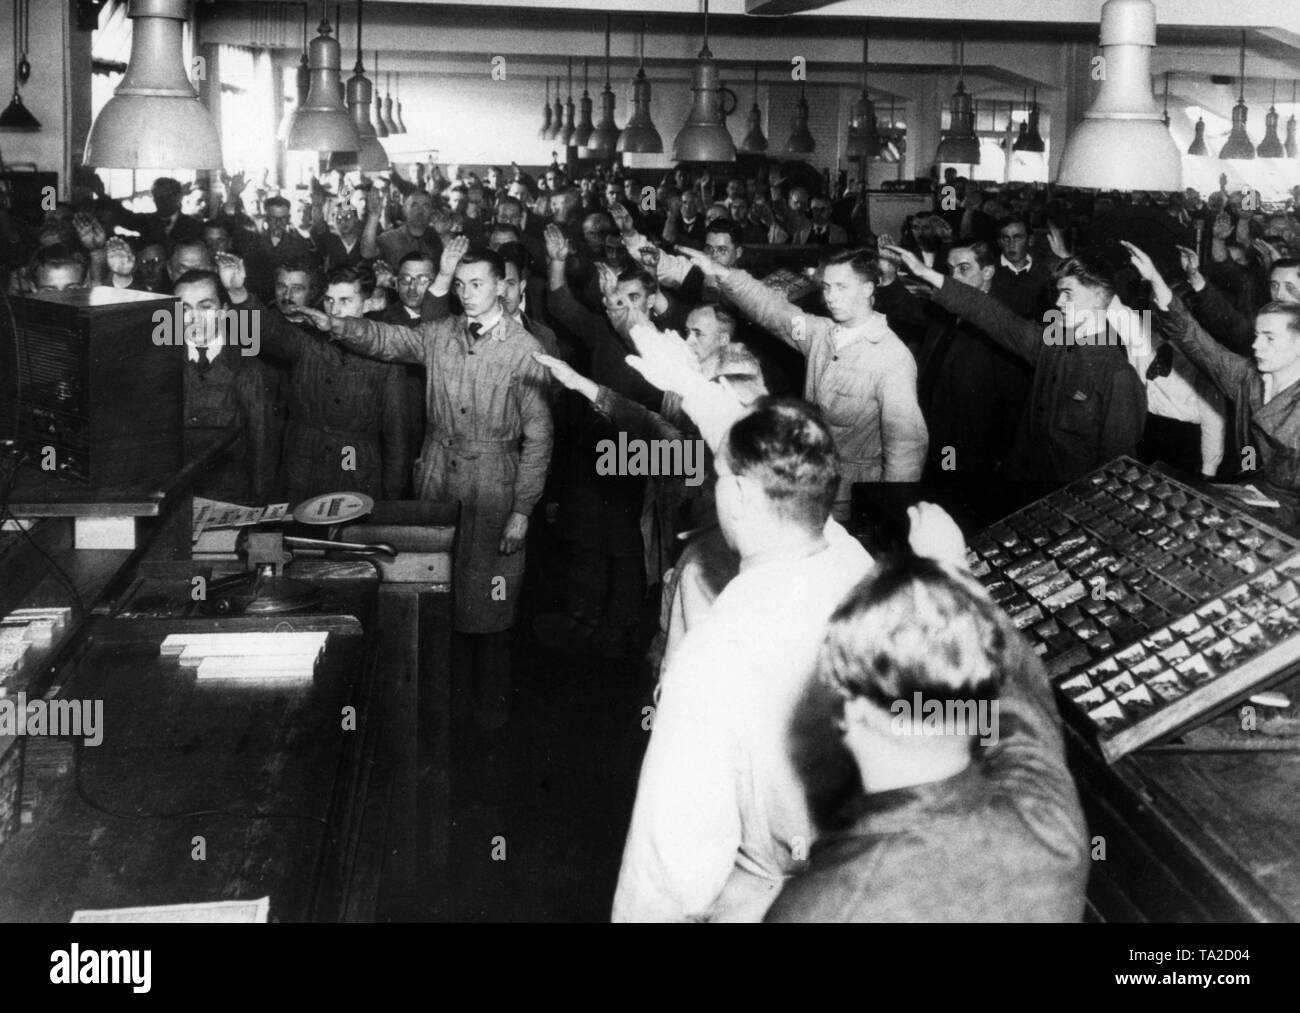 Employees sing the Horst Wssel Lied in the Scherl printing house at the end of the community reception. They perform the Nazi salute. On the right, a shadowbox, also called composing rack. A Volksempfaenger (radio) stands in front of the factory employees. Stock Photo